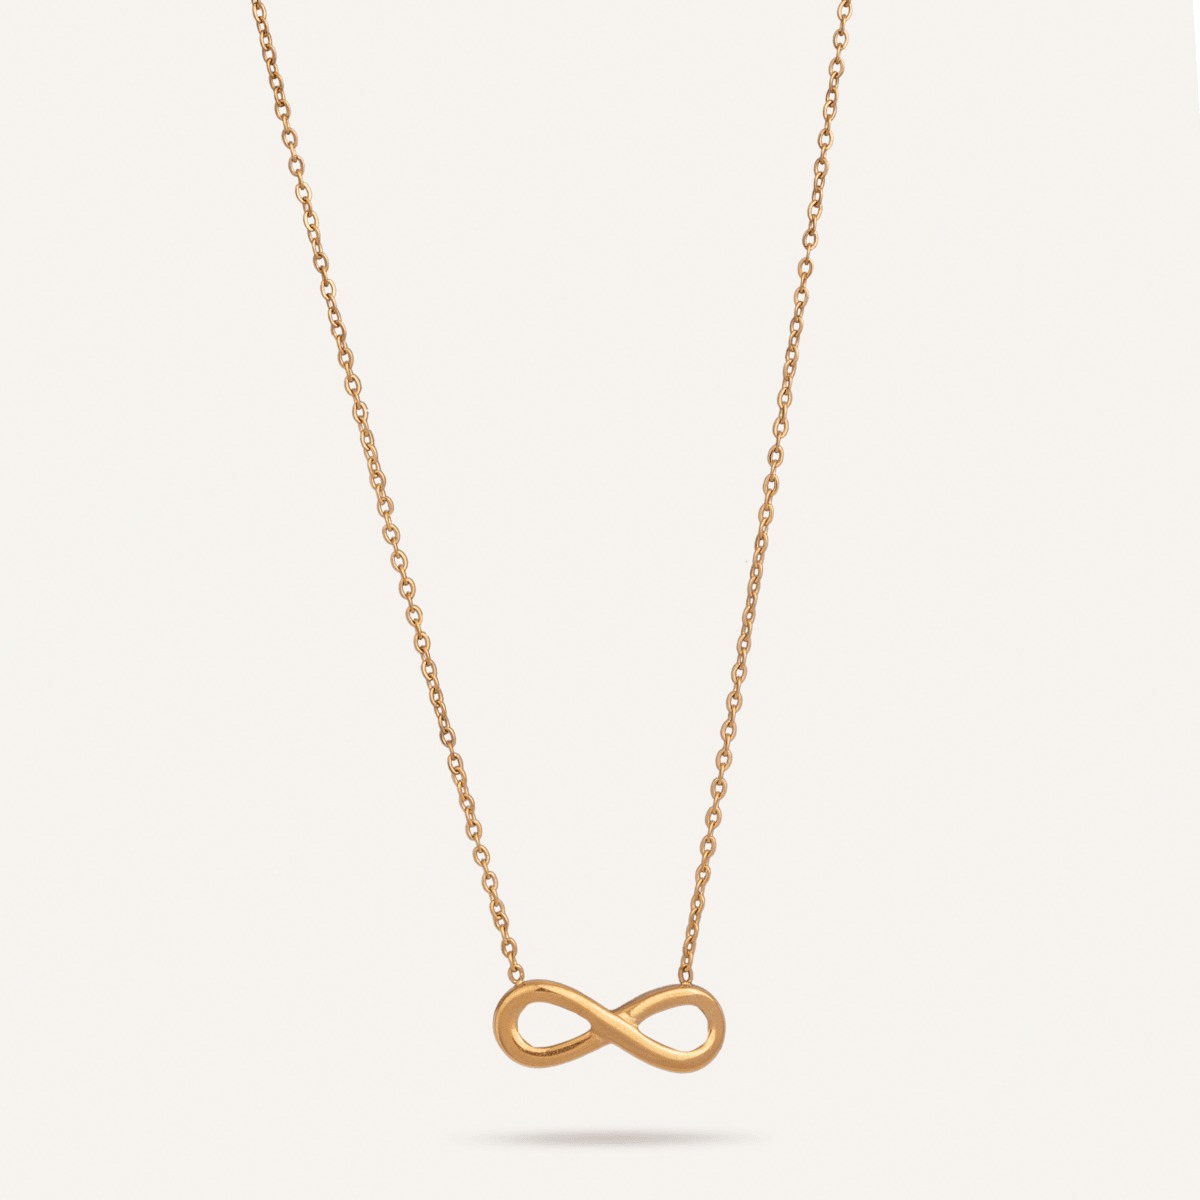 Infinity Loop Necklaces For Women - Eternity And Style Combined